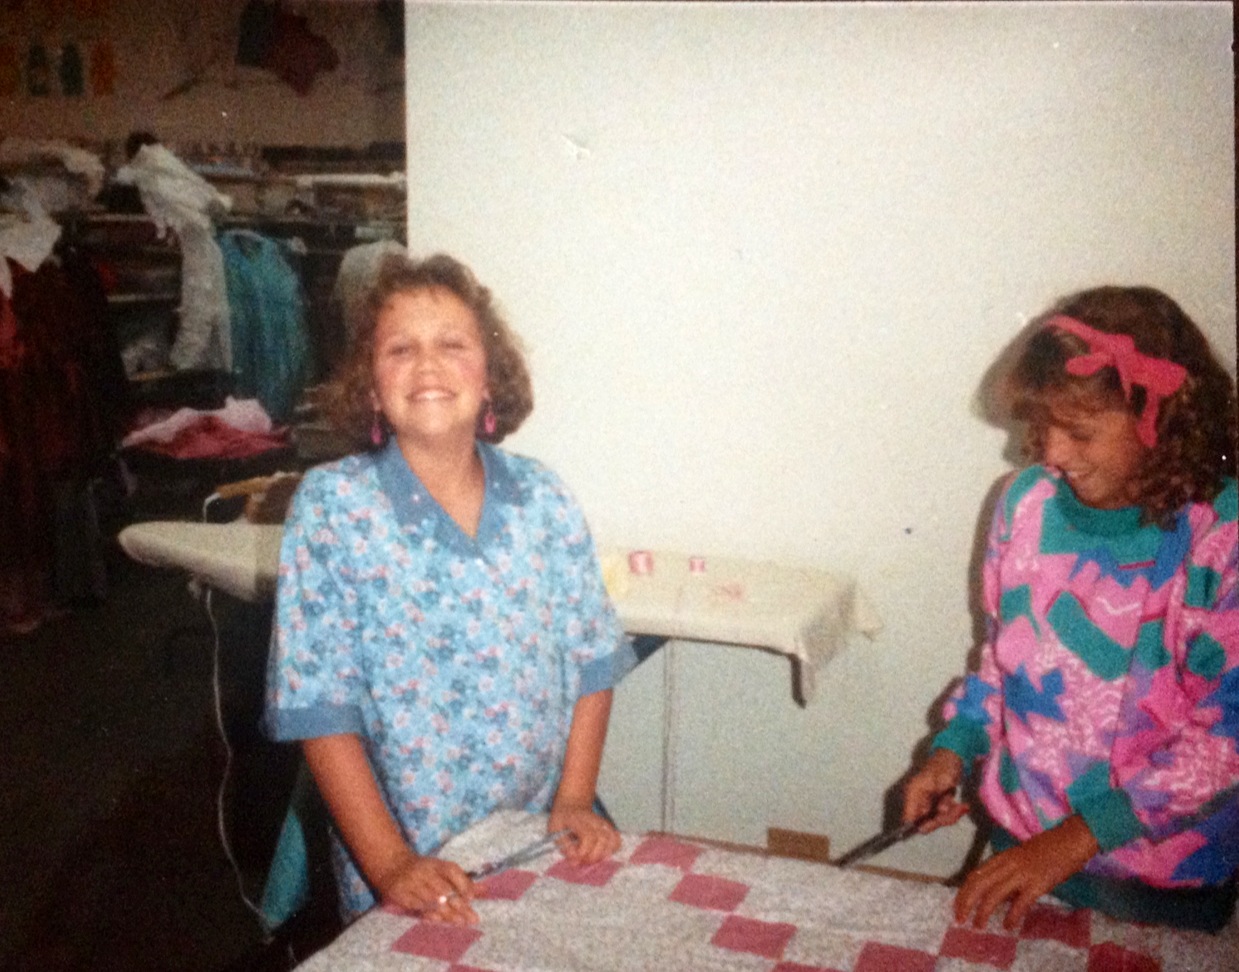 Me, at 11-years-old, making my very first quilt.